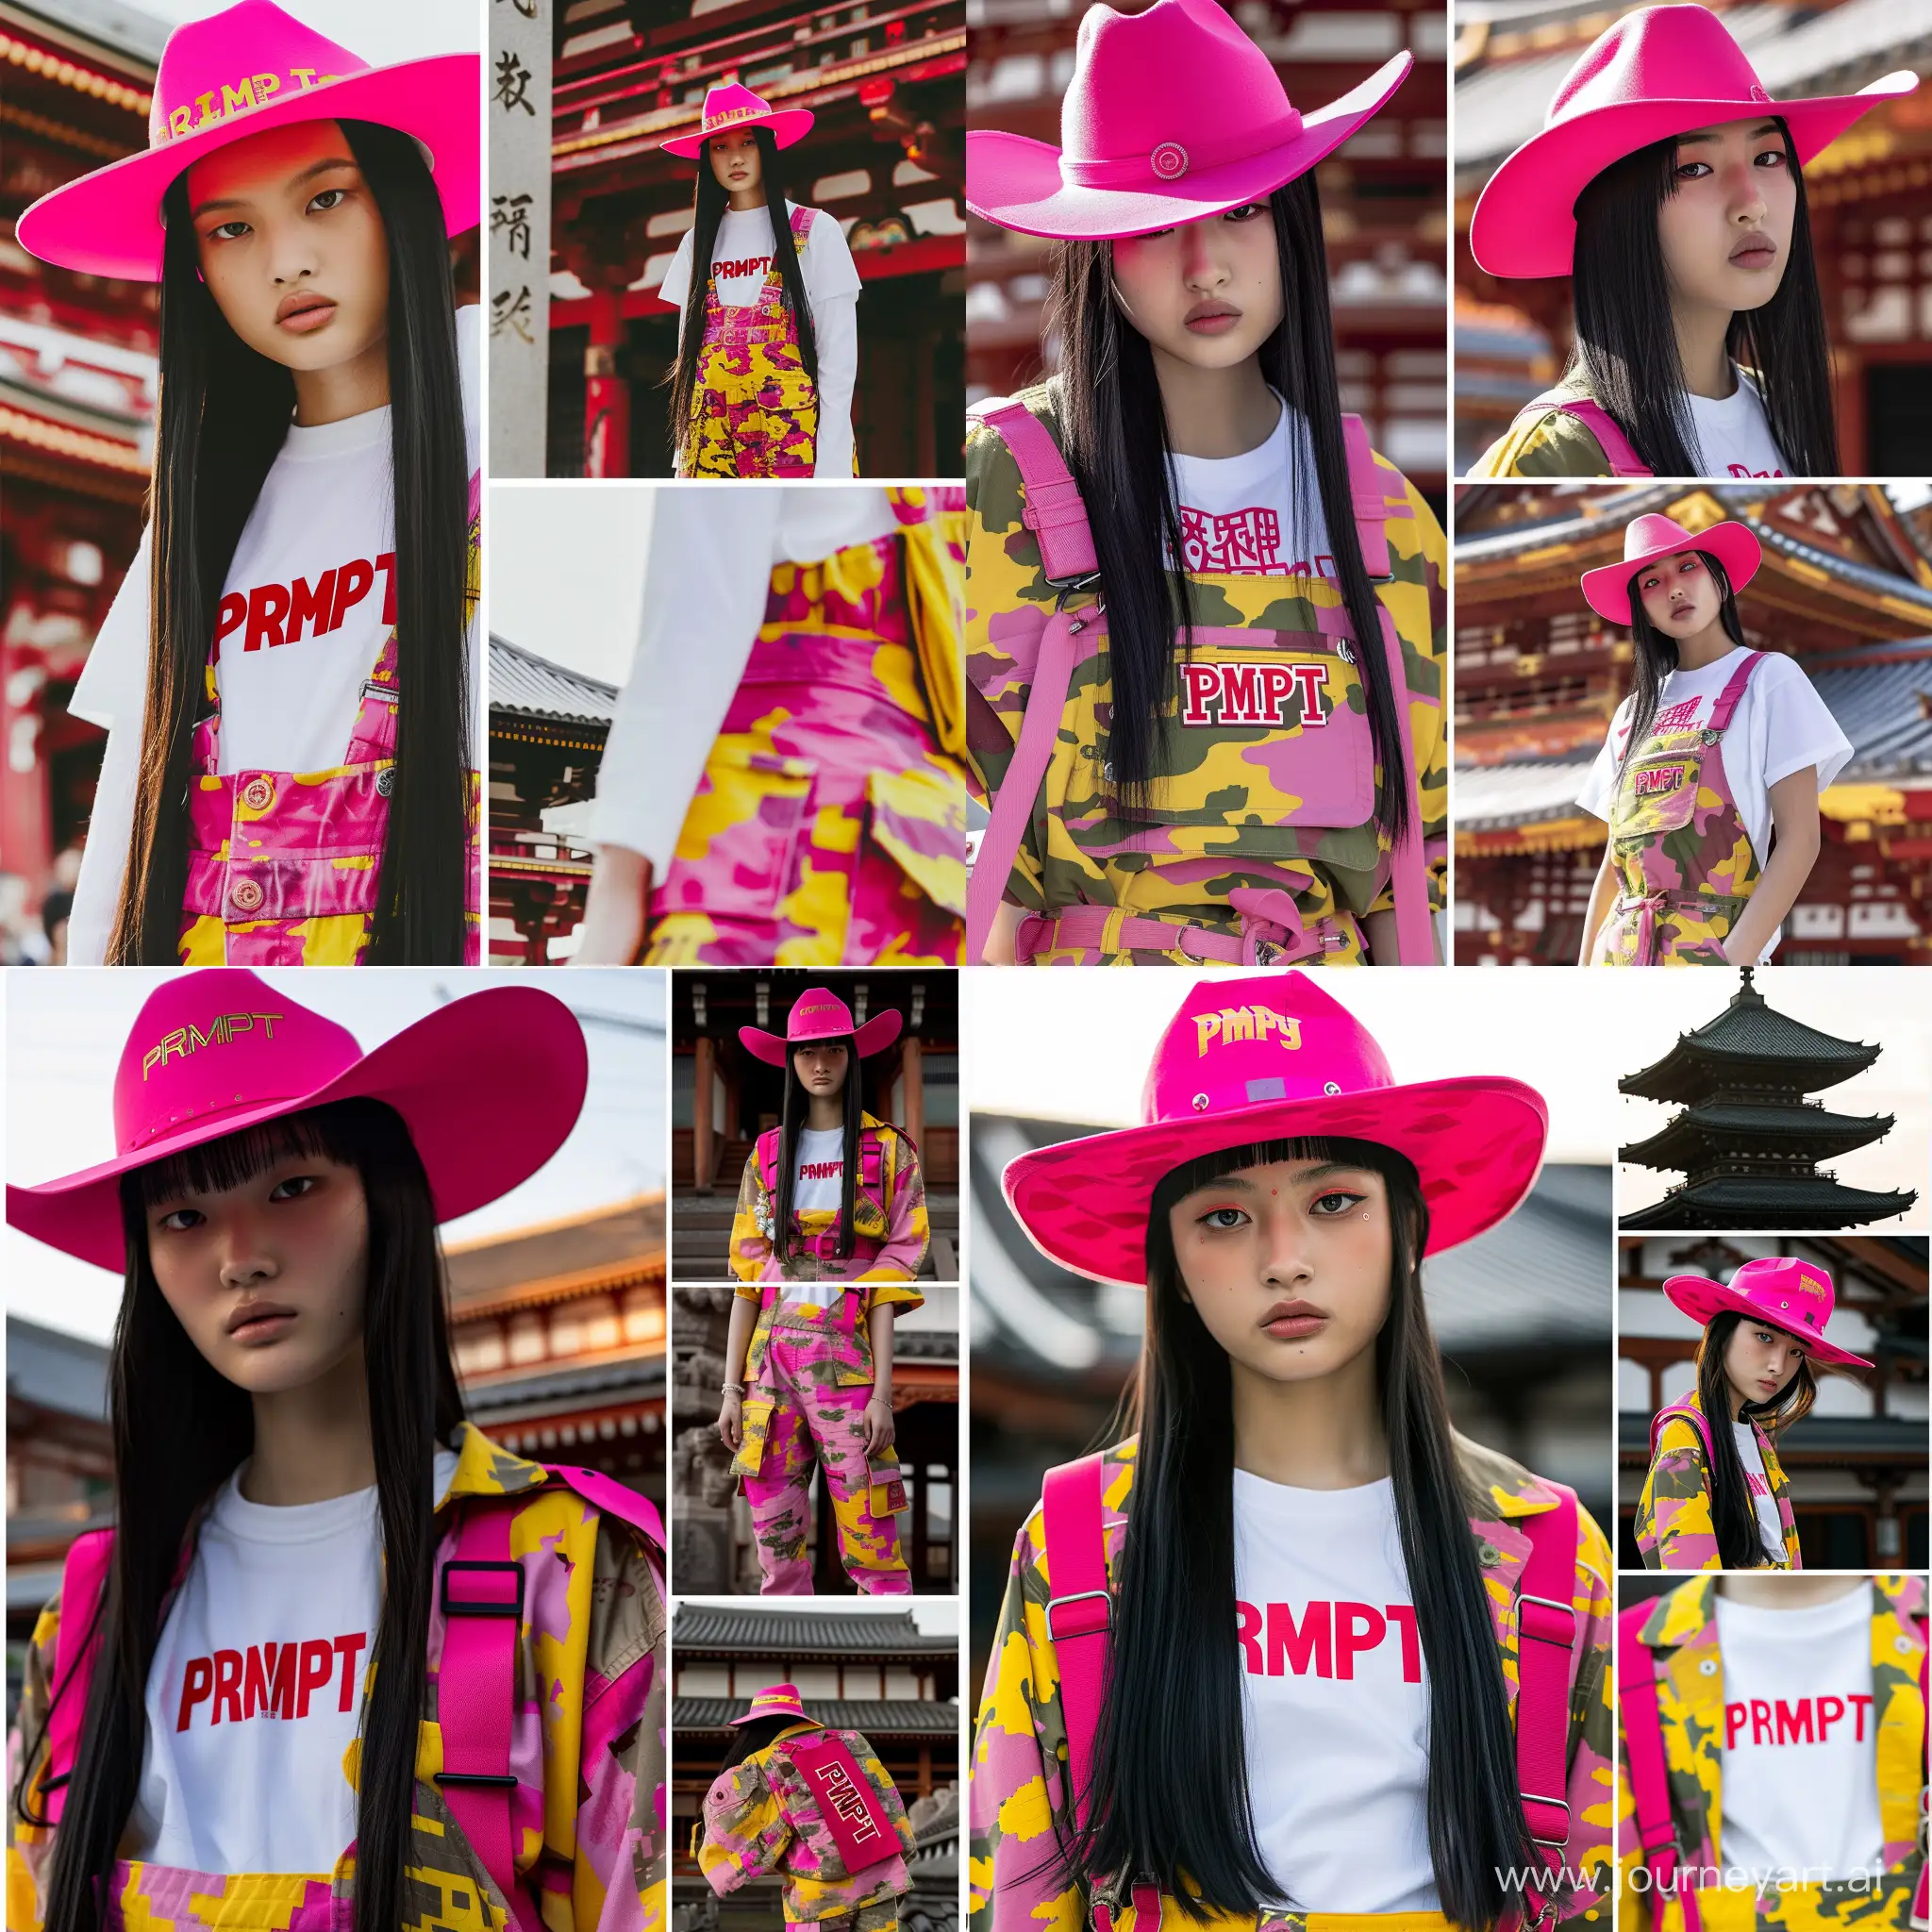 Asian-Fashion-Editorial-Neon-Pink-Cowboy-Hat-and-Vibrant-Camo-Overalls-in-Traditional-Japanese-Temple-Setting